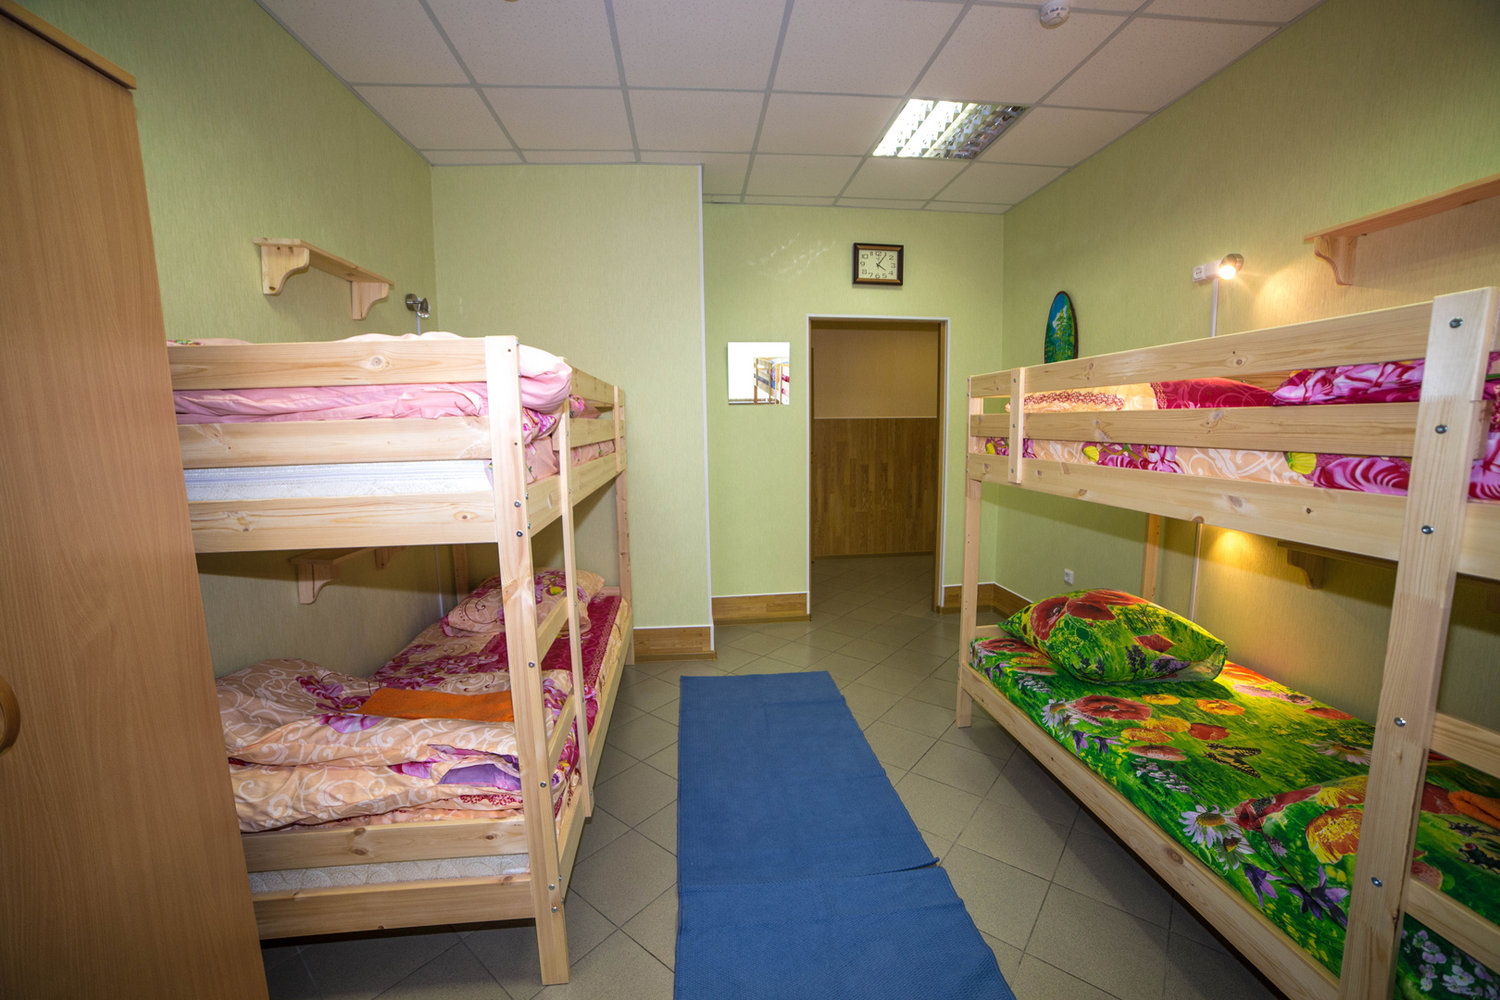 8-Bed female room